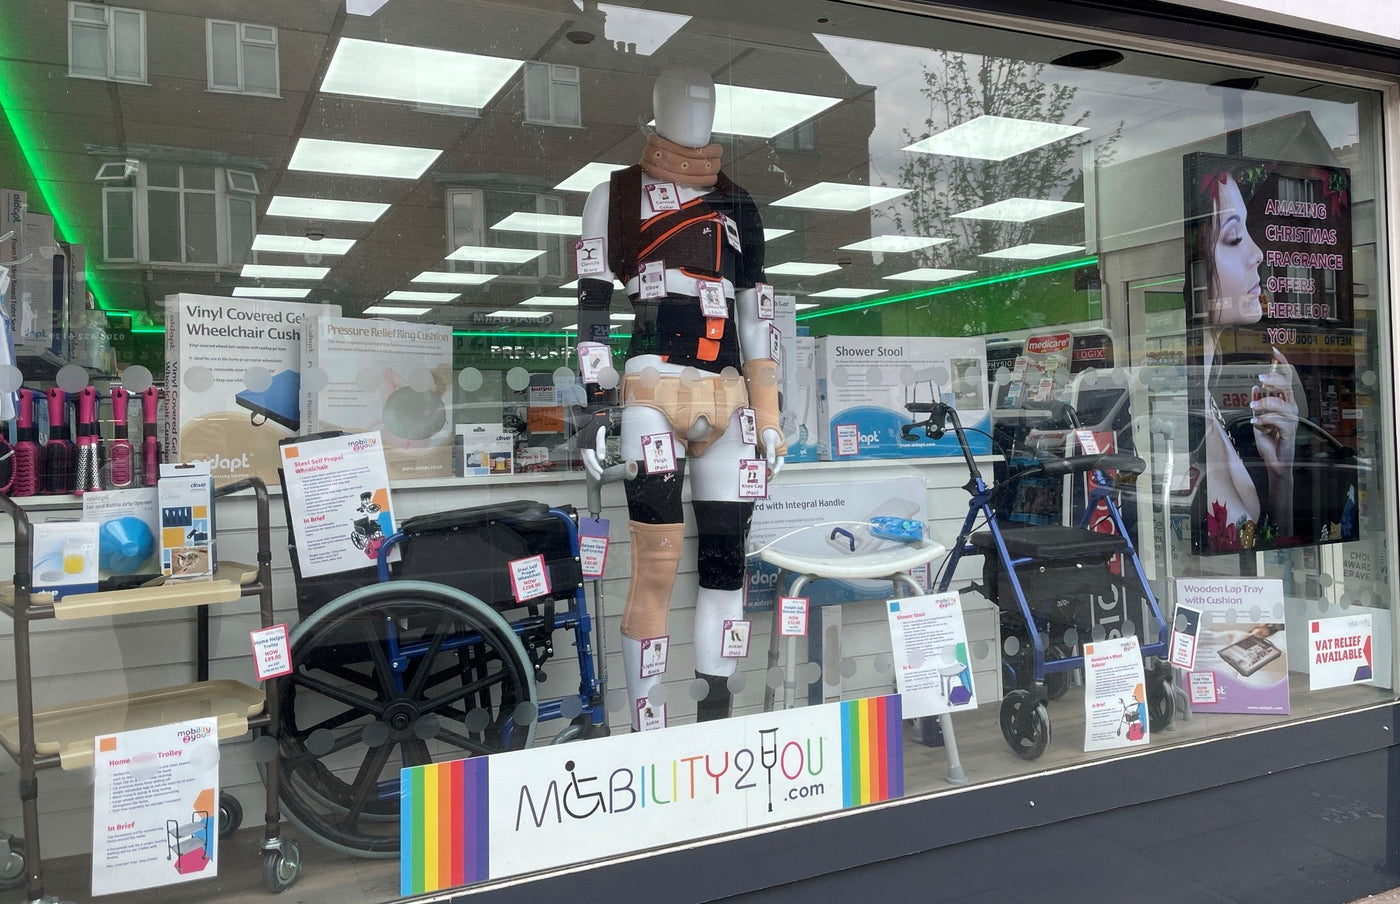 Wheelchairs, Shower stool and mobility aids at Wellcare Pharmacy and Mobility2You Centre Sudbury. DIsability Equipment shop on Greenford road Harrow.  